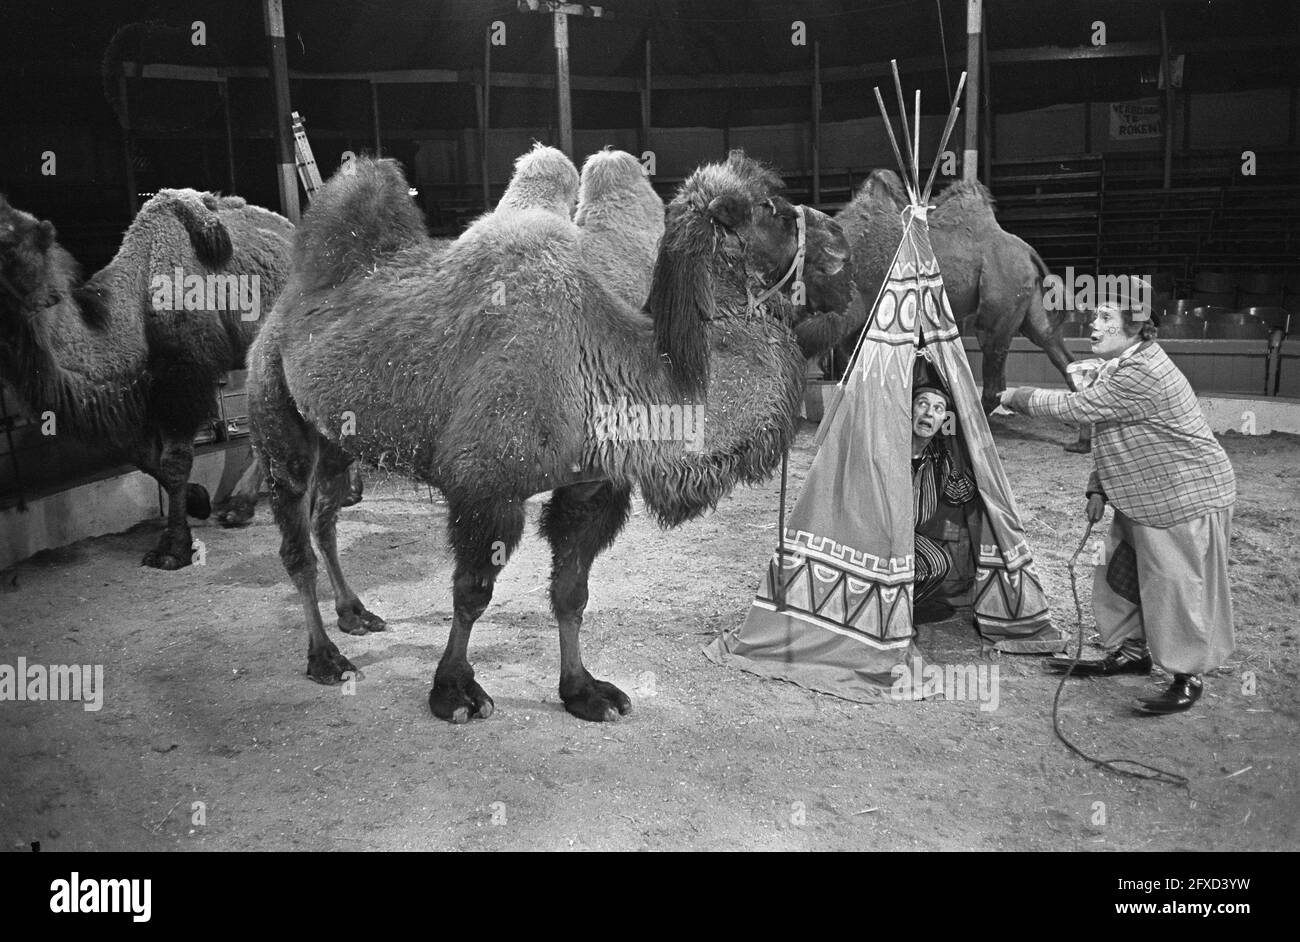 Pipo in the circus with Toni Boltini, Kluck Kluck in his tent, February 22, 1968, circuses, clowns, camels, tents, The Netherlands, 20th century press agency photo, news to remember, documentary, historic photography 1945-1990, visual stories, human history of the Twentieth Century, capturing moments in time Stock Photo